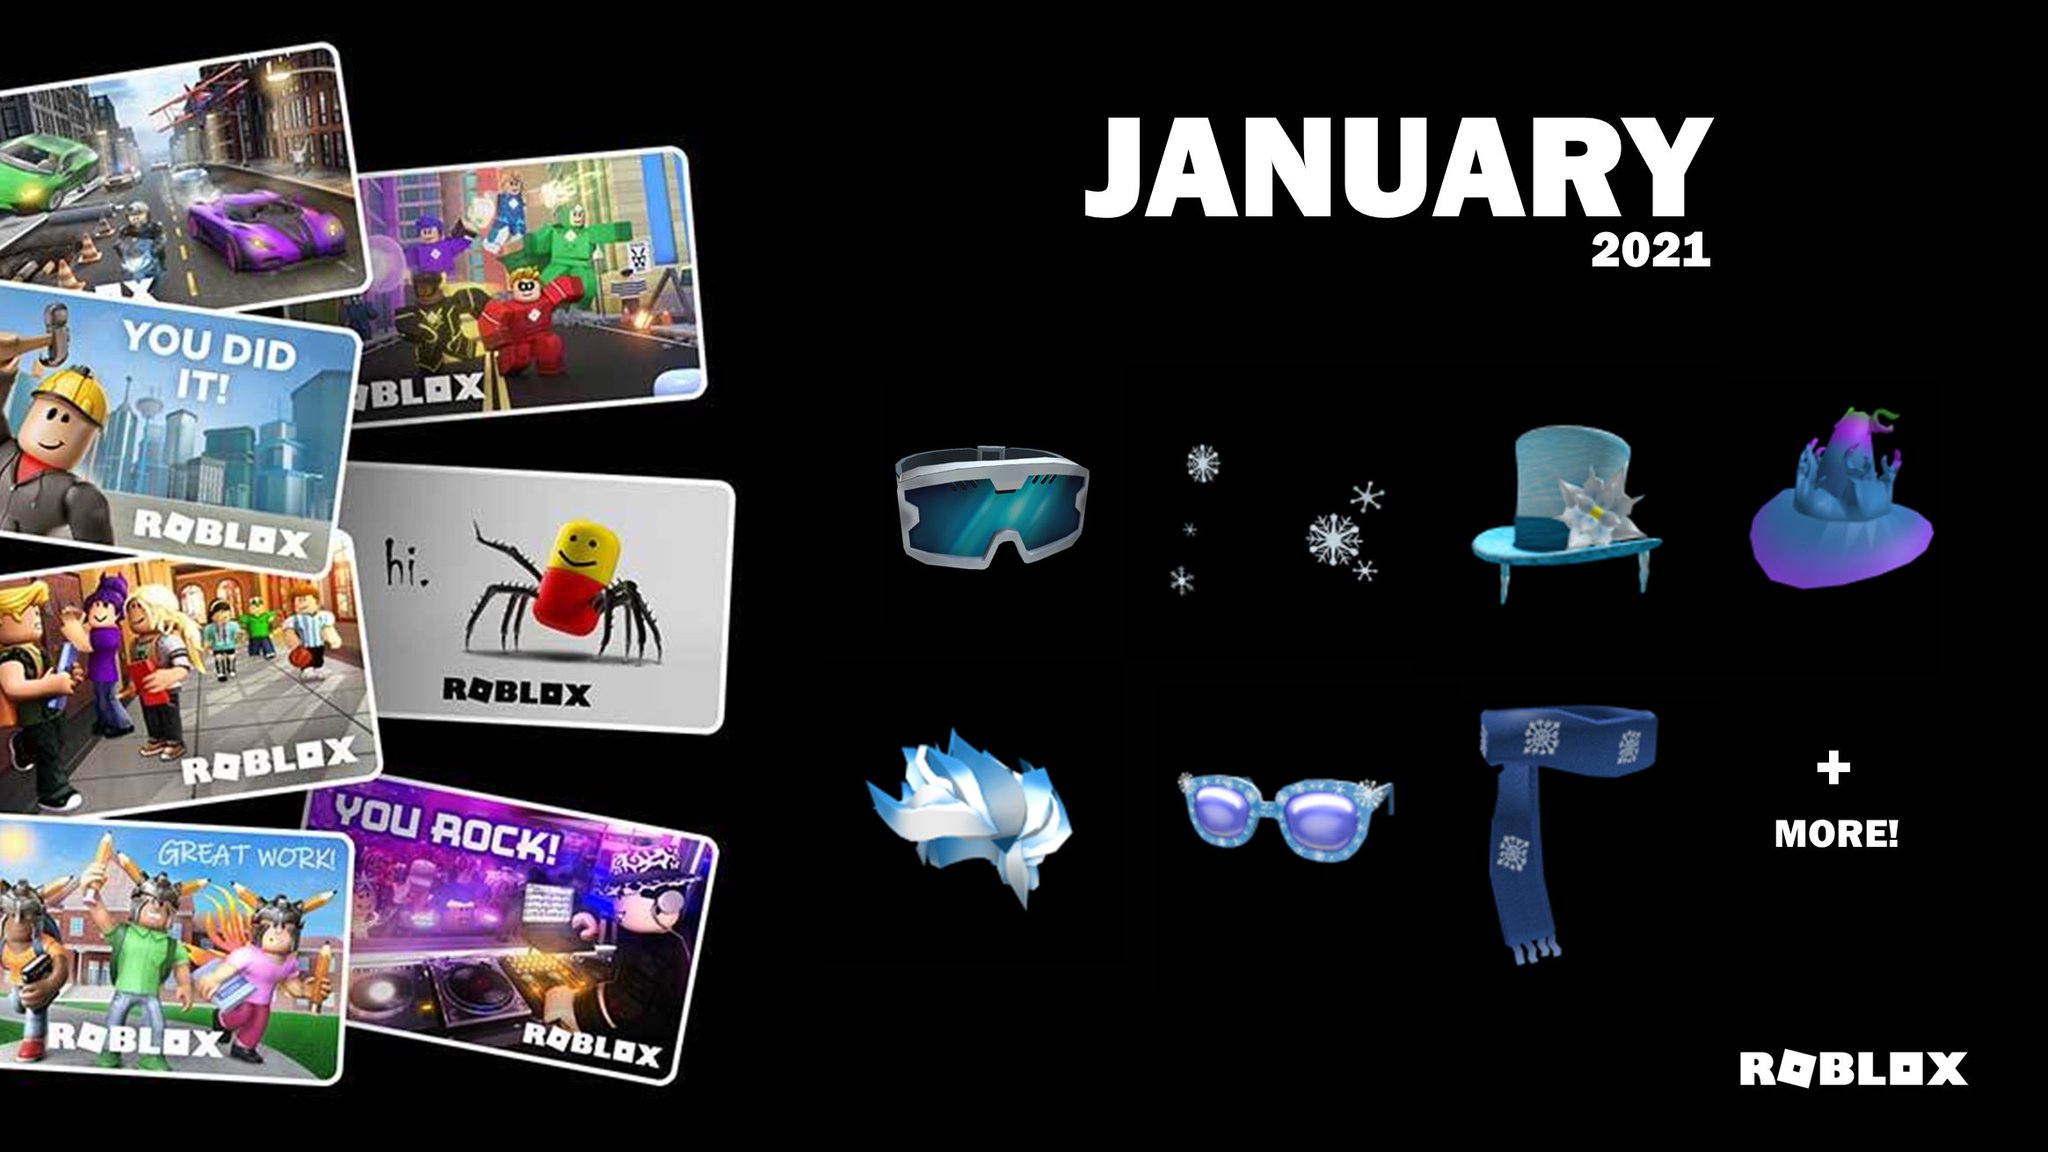 Bloxy News On Twitter The Roblox Gift Card Virtual Items And Their Corresponding Stores For January 2021 Are Now Available Check Them Out Here Https T Co Pujwqlz5yt Purchase A Gift Card - roblox gift card near me